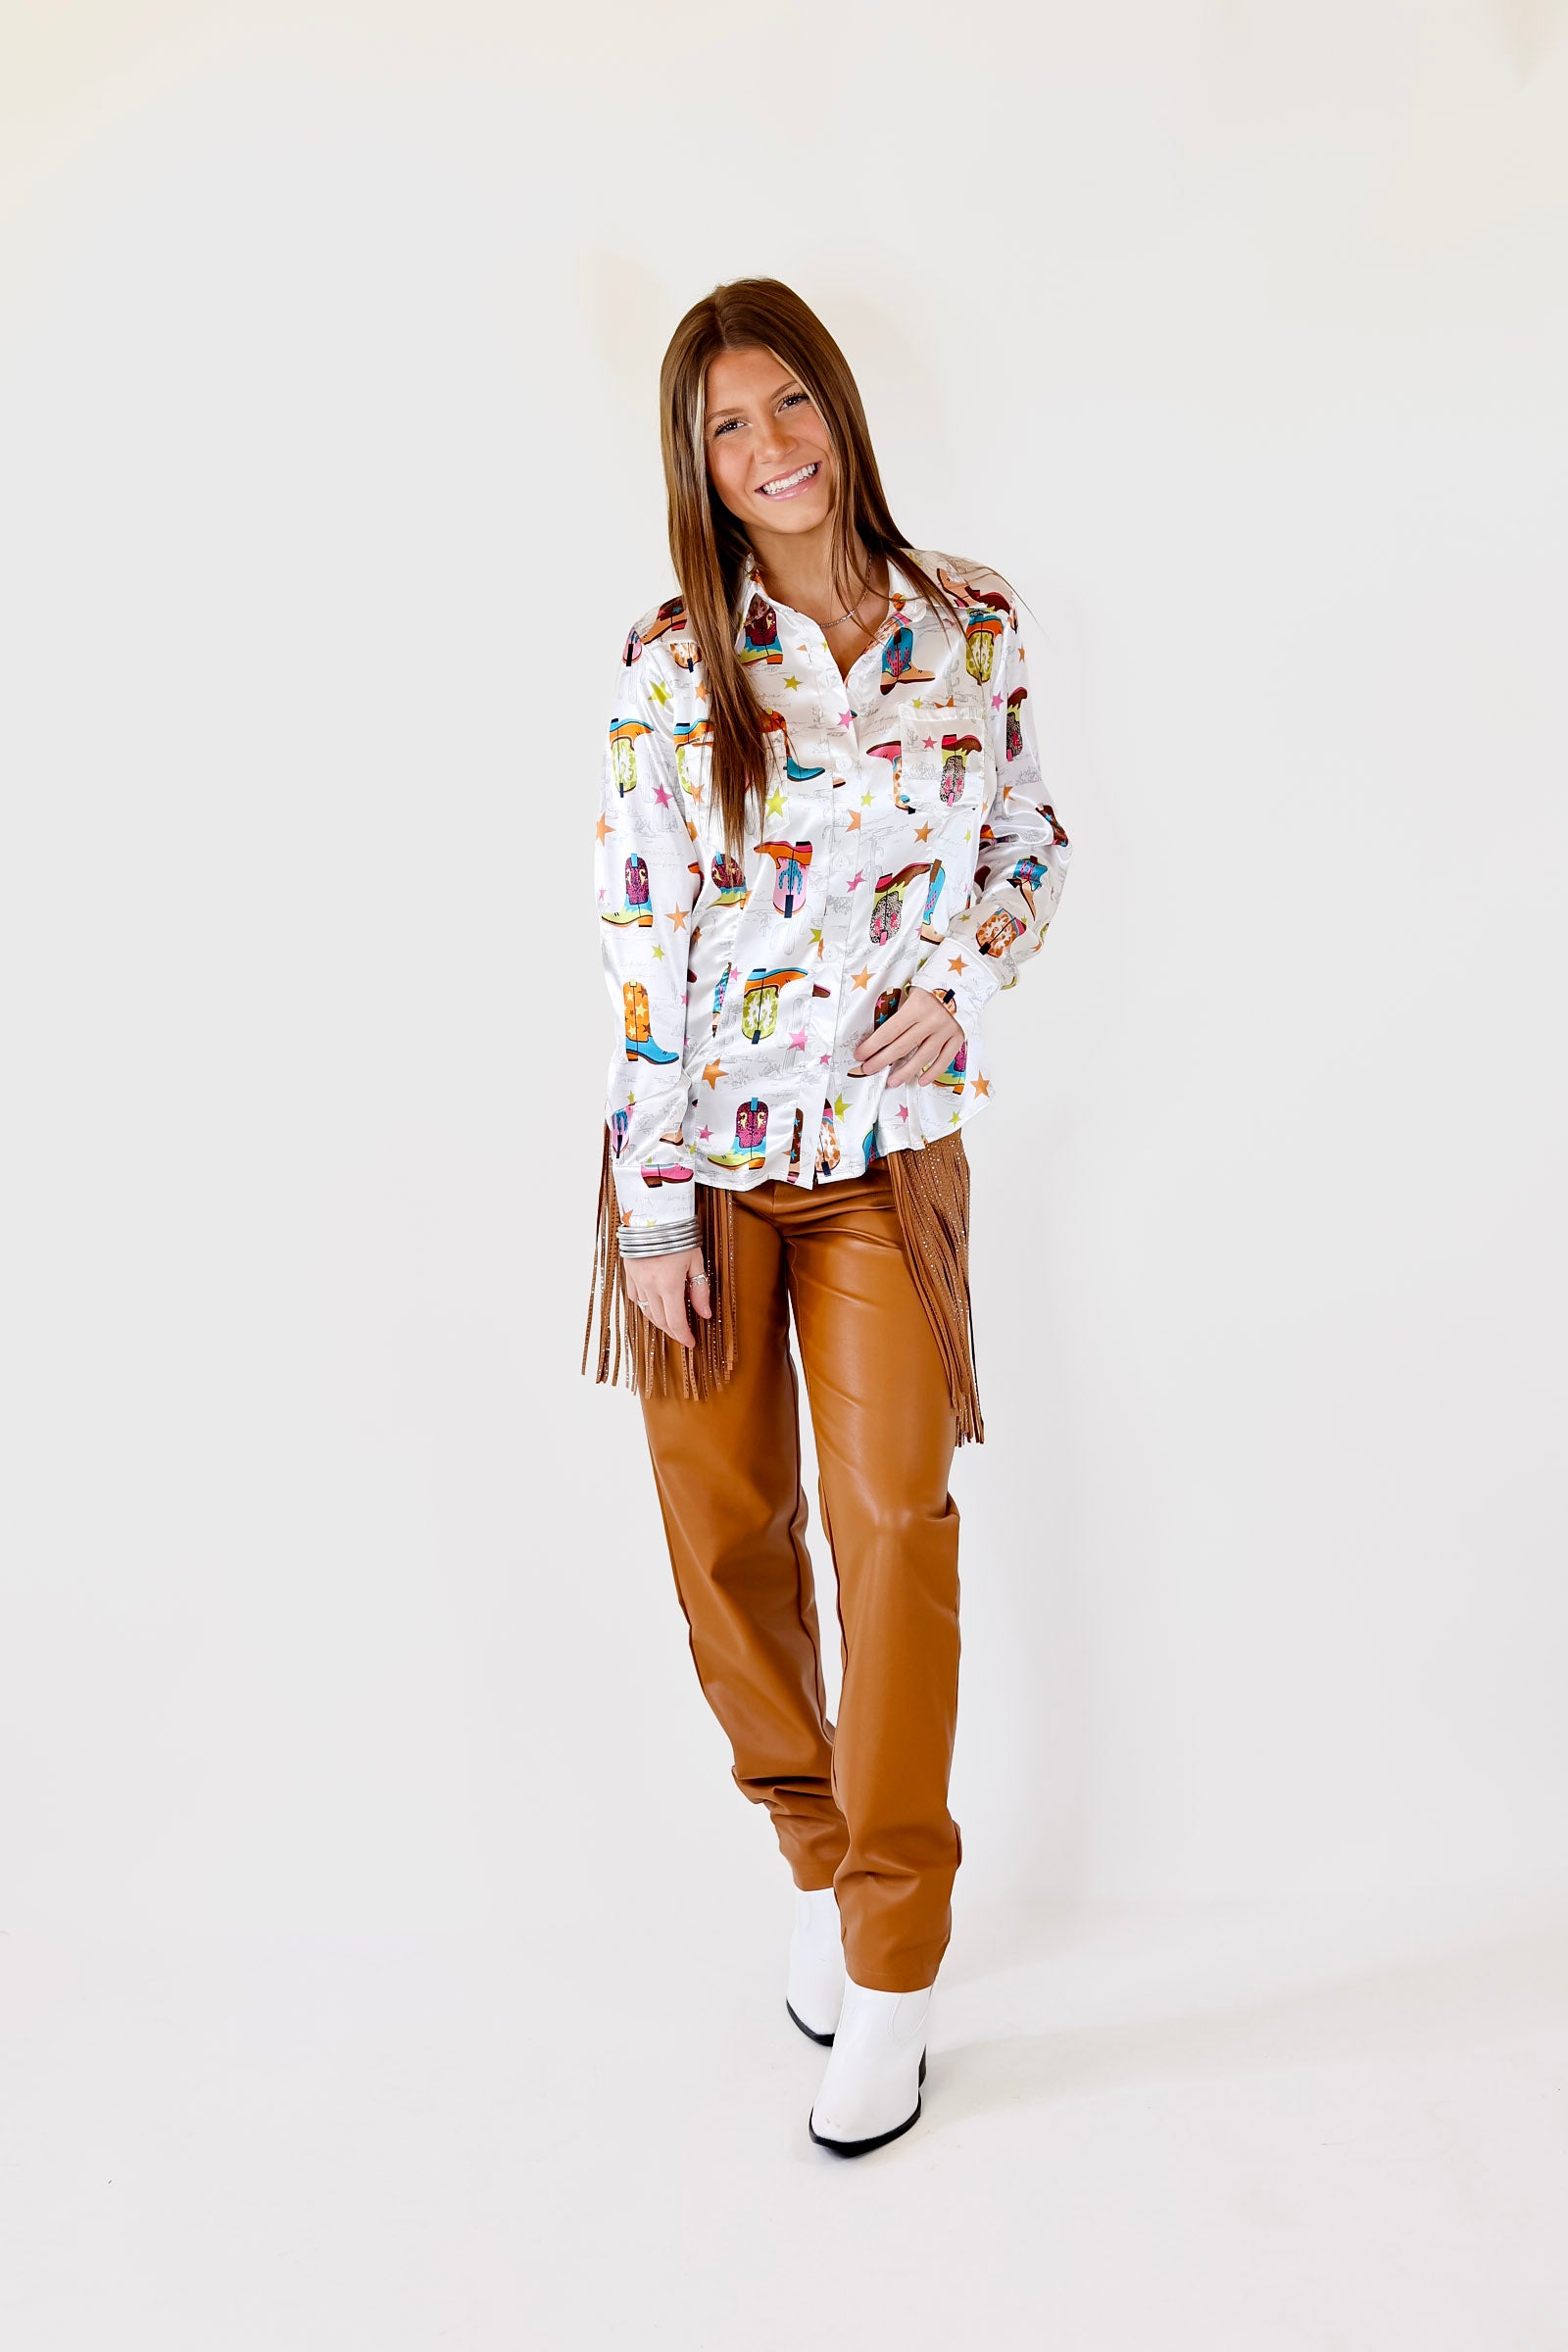 Get 'Em Girl Cowboy Boot Print Button Up Long Sleeve Top in White - Giddy Up Glamour Boutique